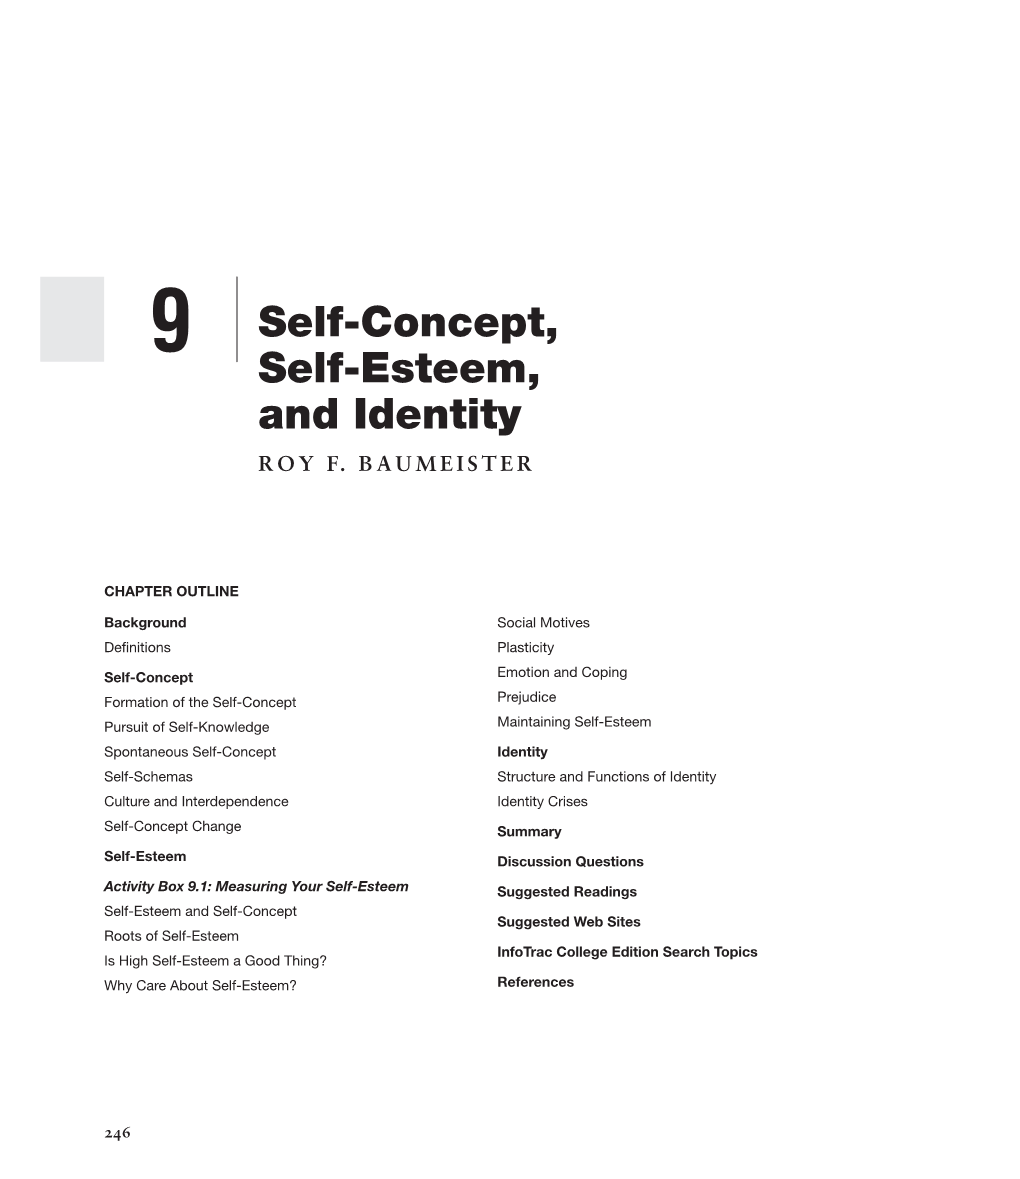 Self-Concept, Self-Esteem and Identity: Roy F. Baumeister